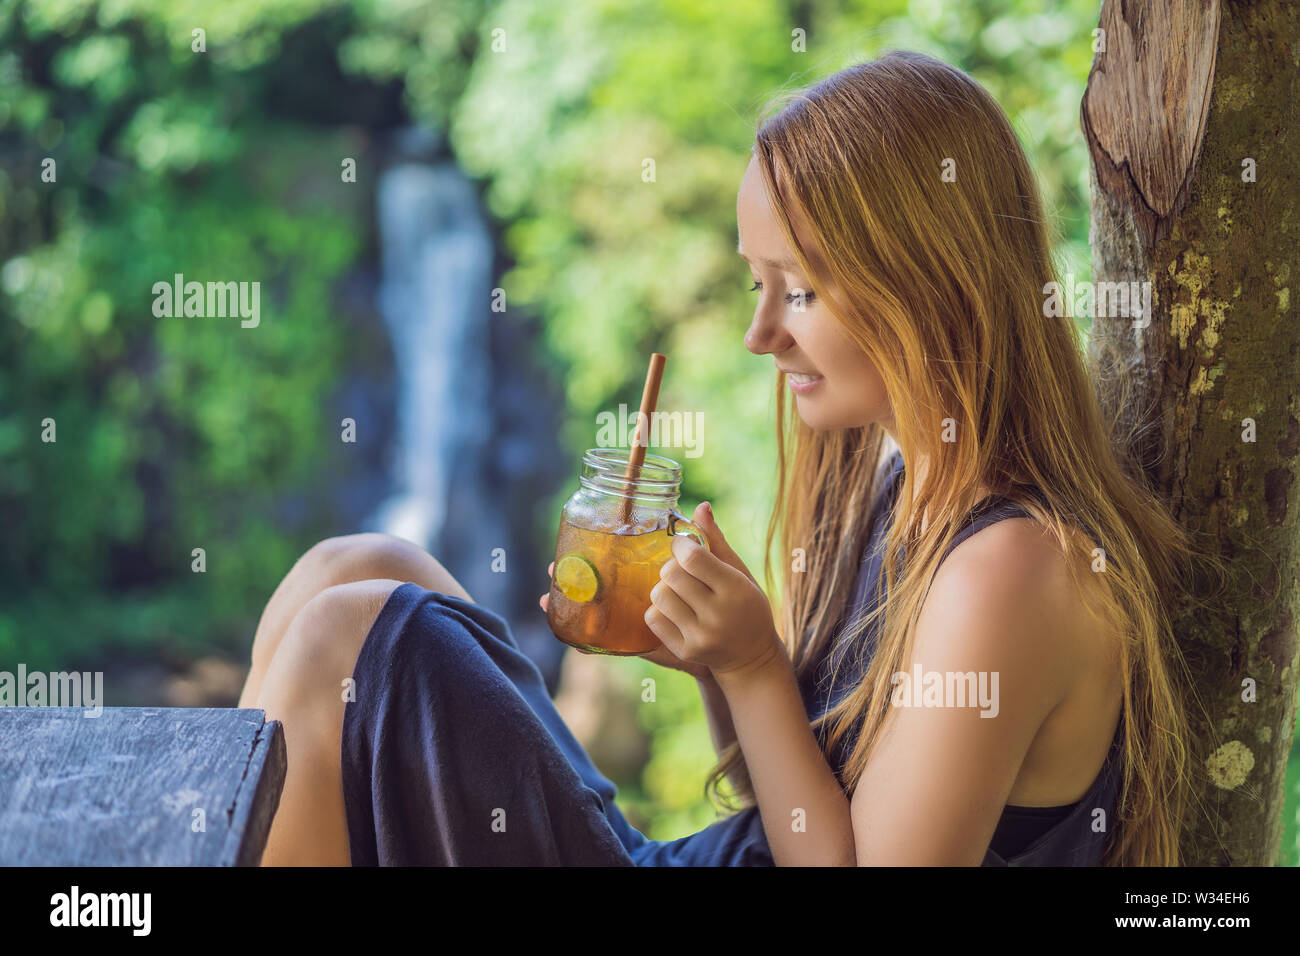 Closeup portrait image of a beautiful woman drinking ice tea with feeling in green nature and garden background Stock Photo - Alamy